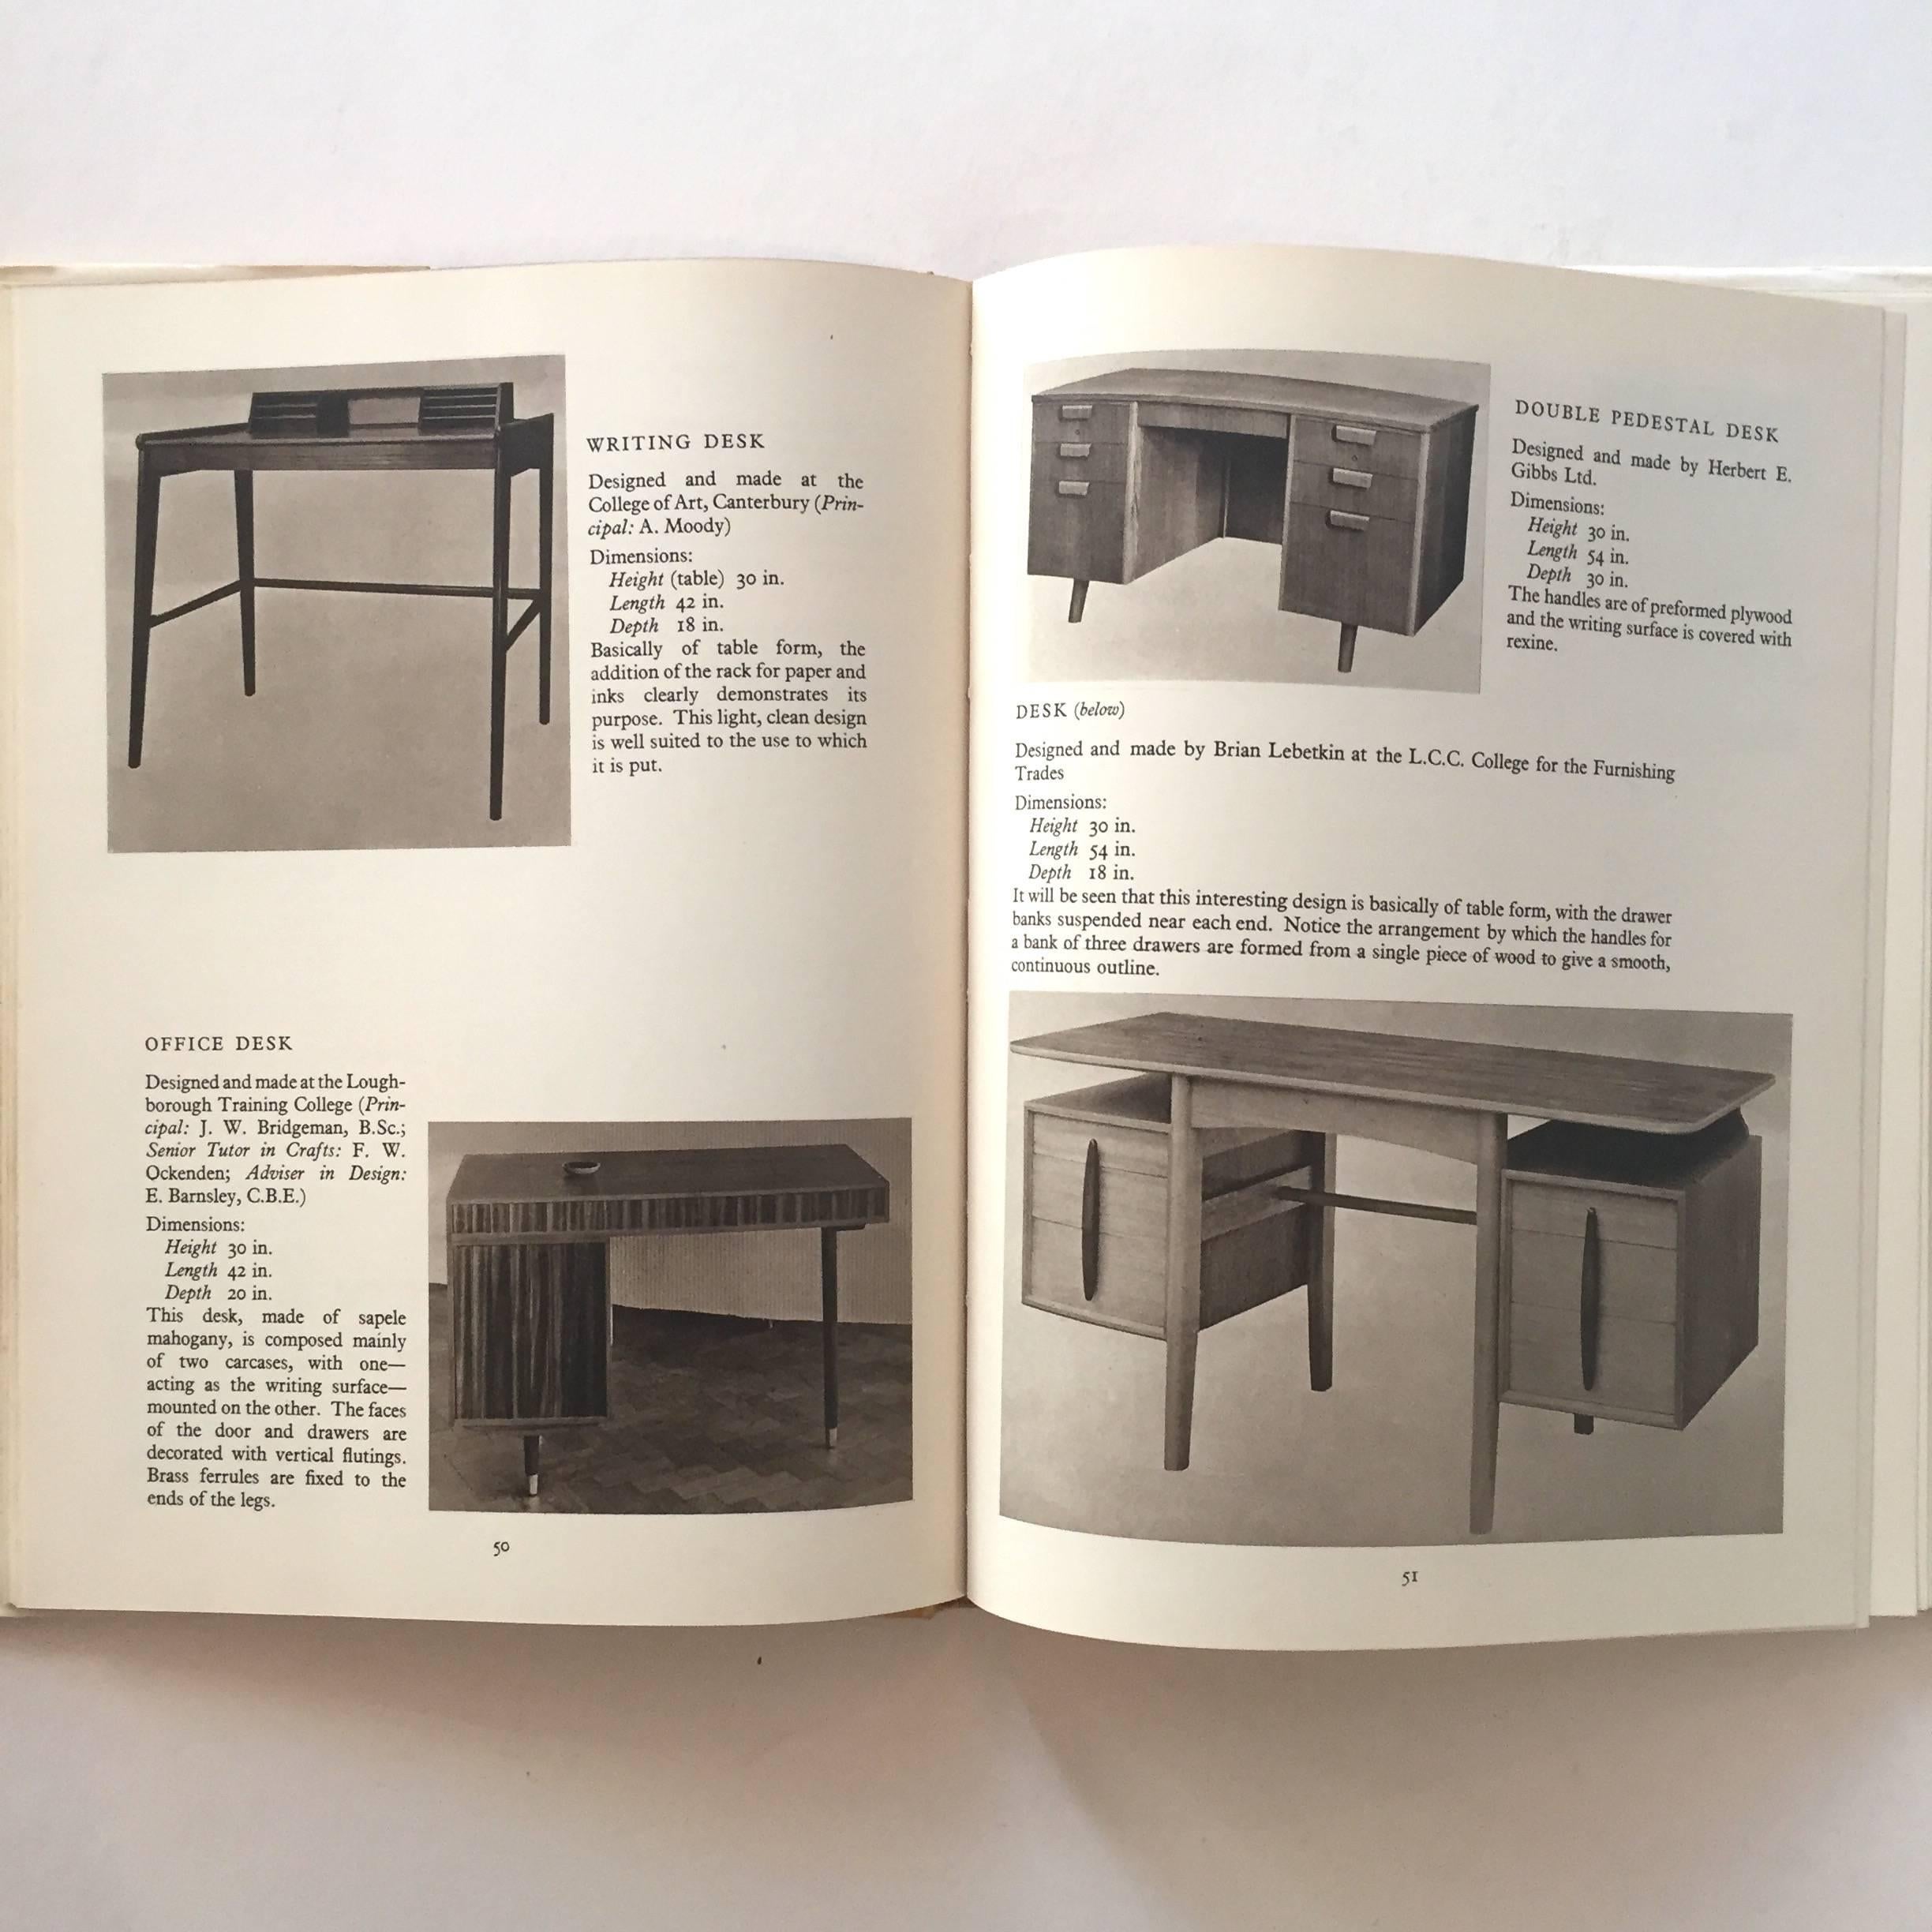 British S. H Glenister, Contemporary Design in Woodwork, 1955